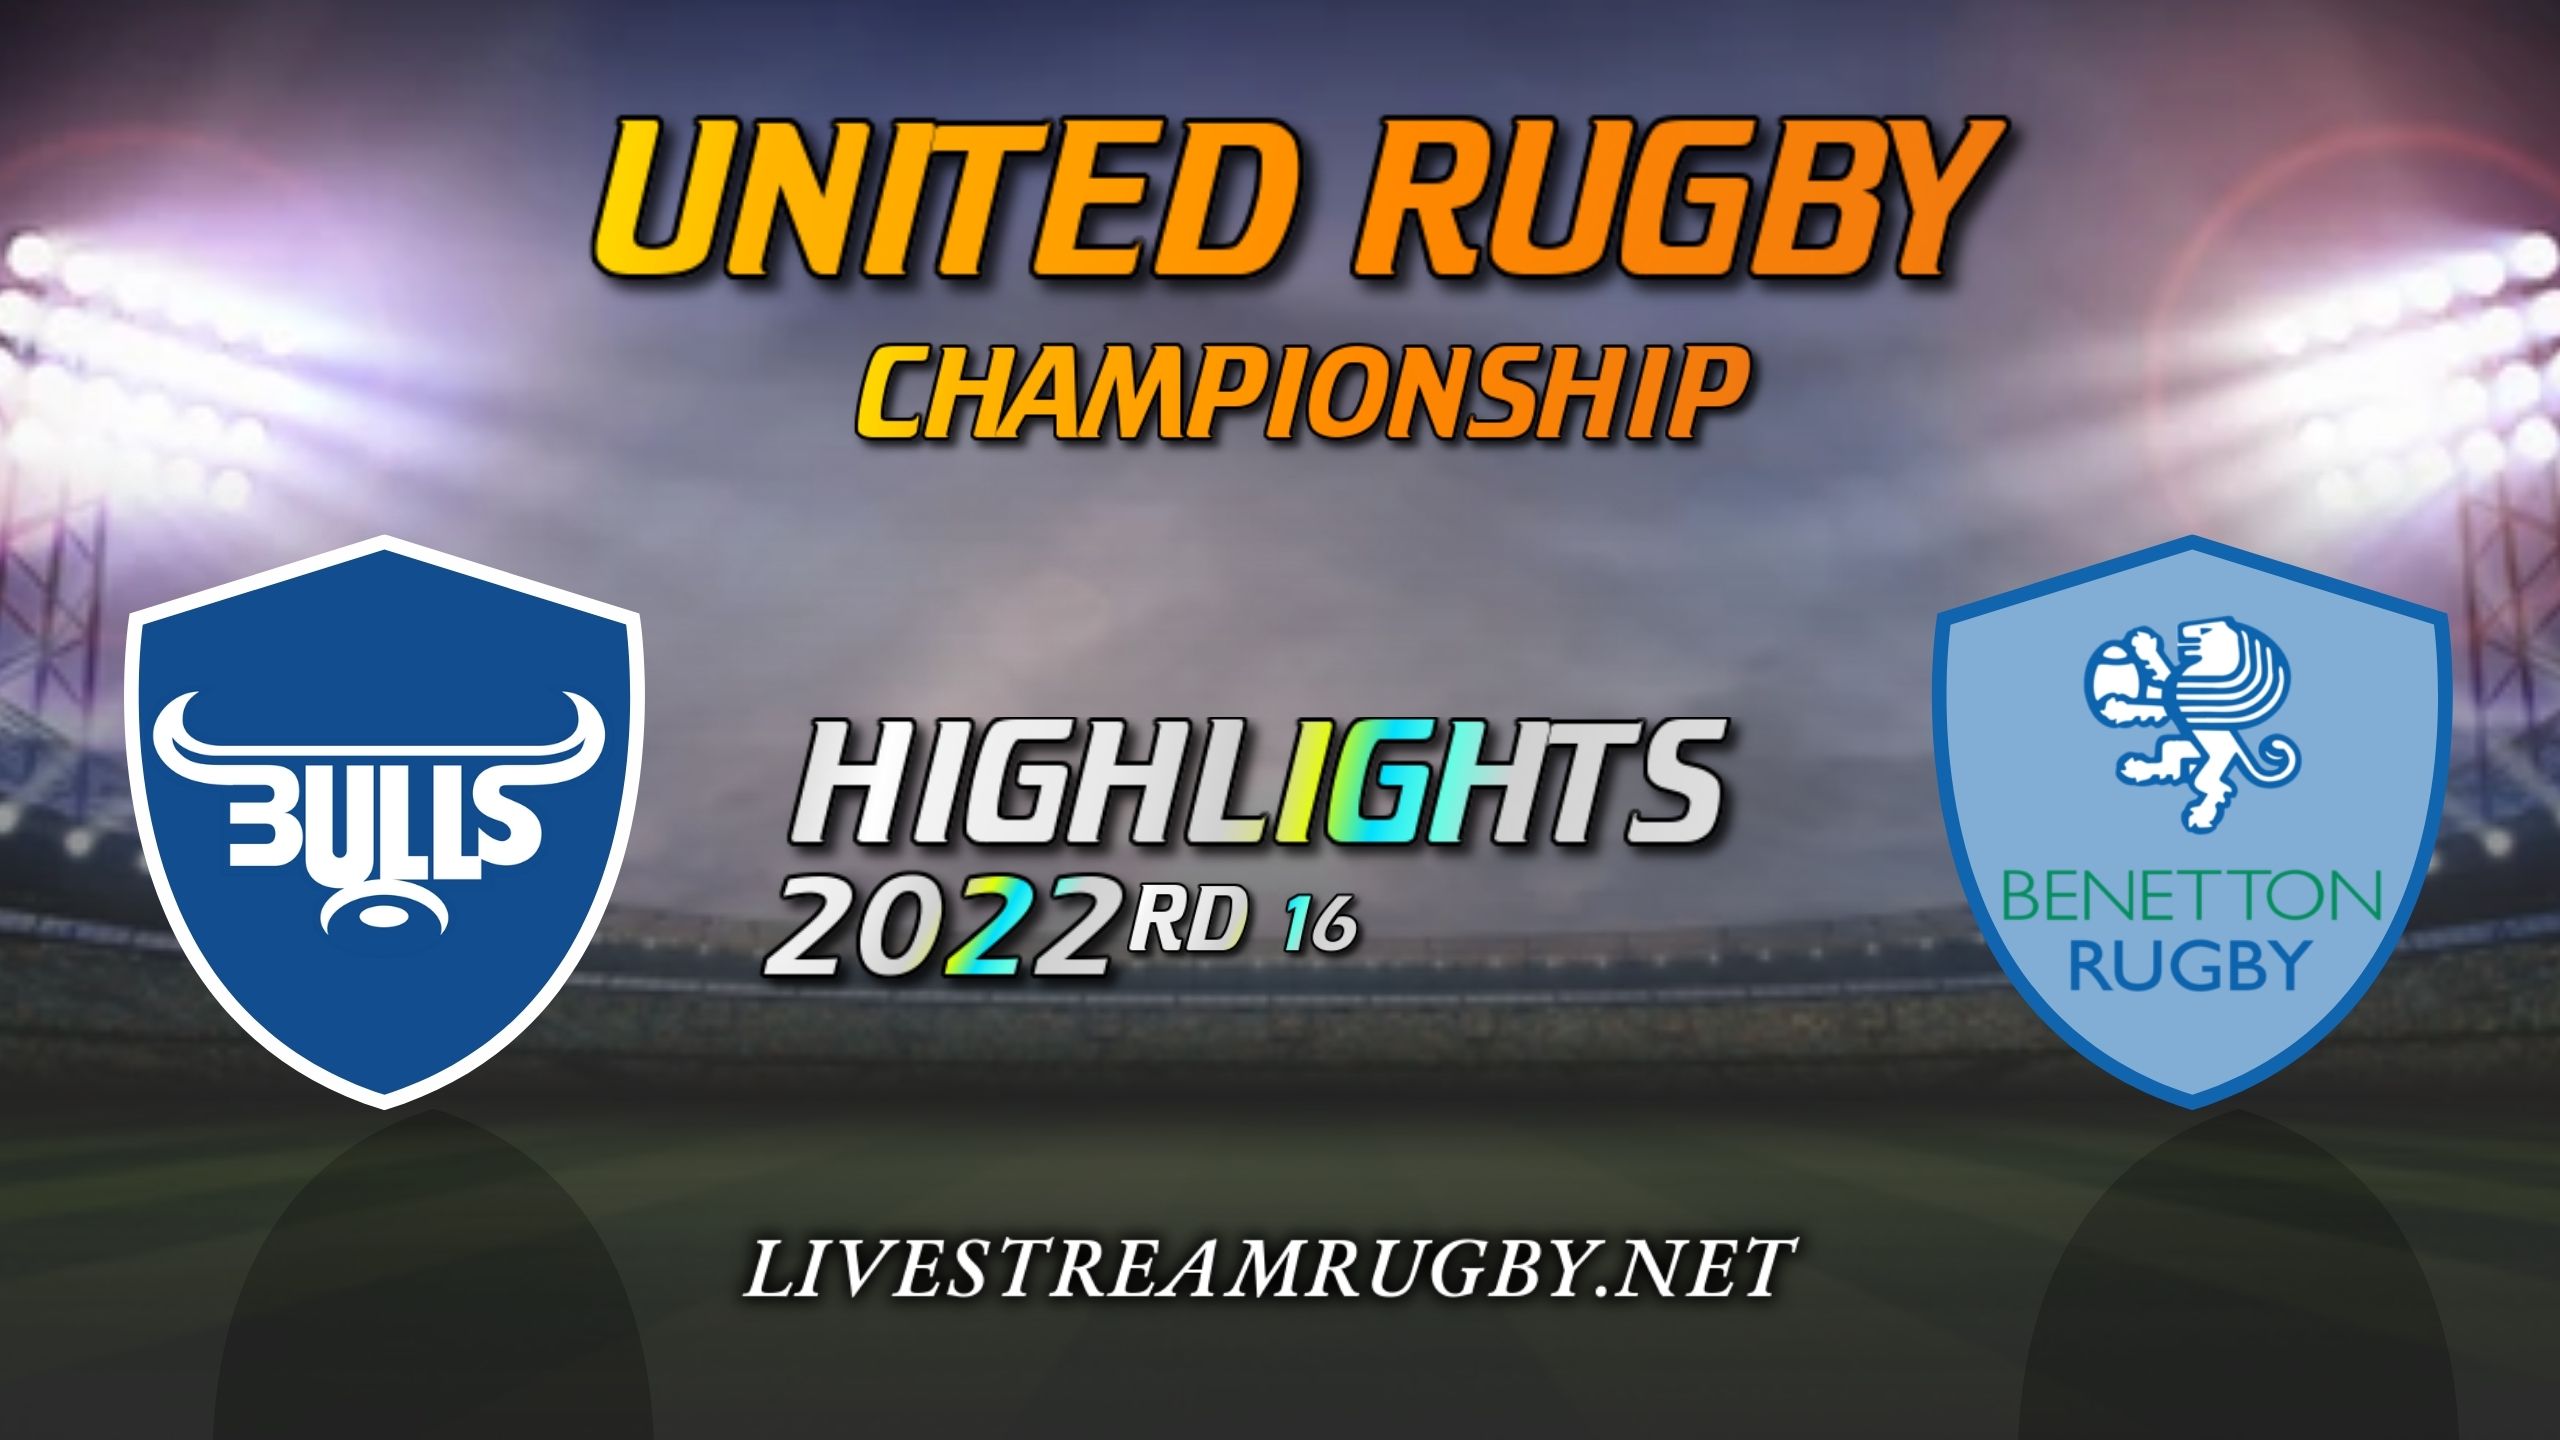 Bulls Vs Benetton Rugby Highlights 2022 Rd 16 United Rugby